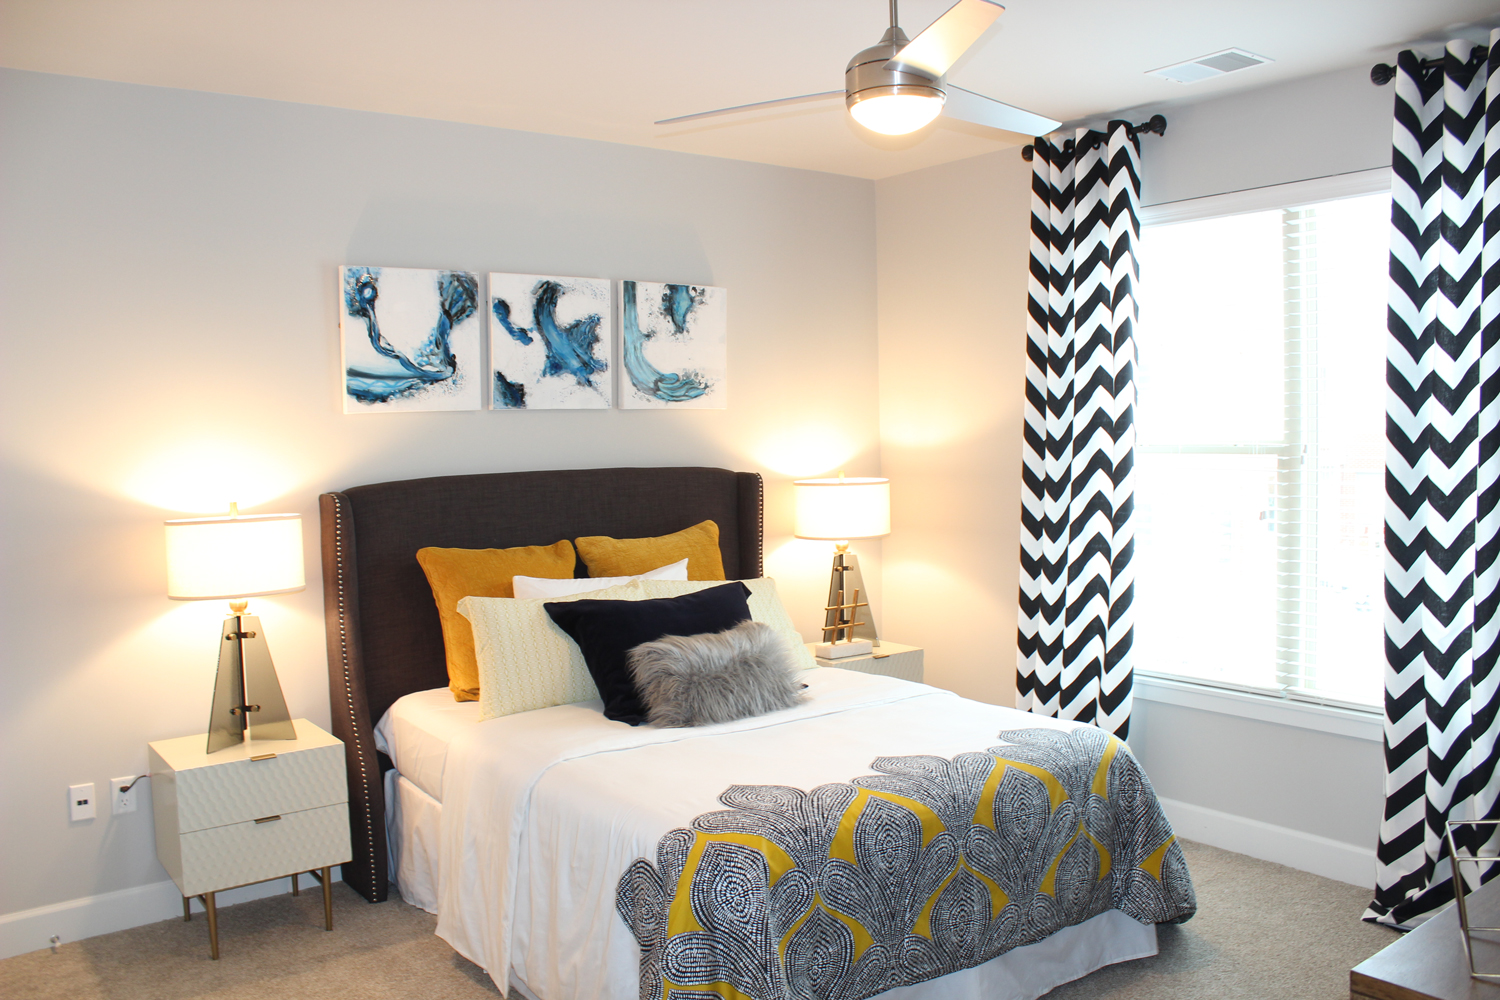 Bedroom Unit at the Vue at Creve Coeur Apartments in Creve Coeur, MO